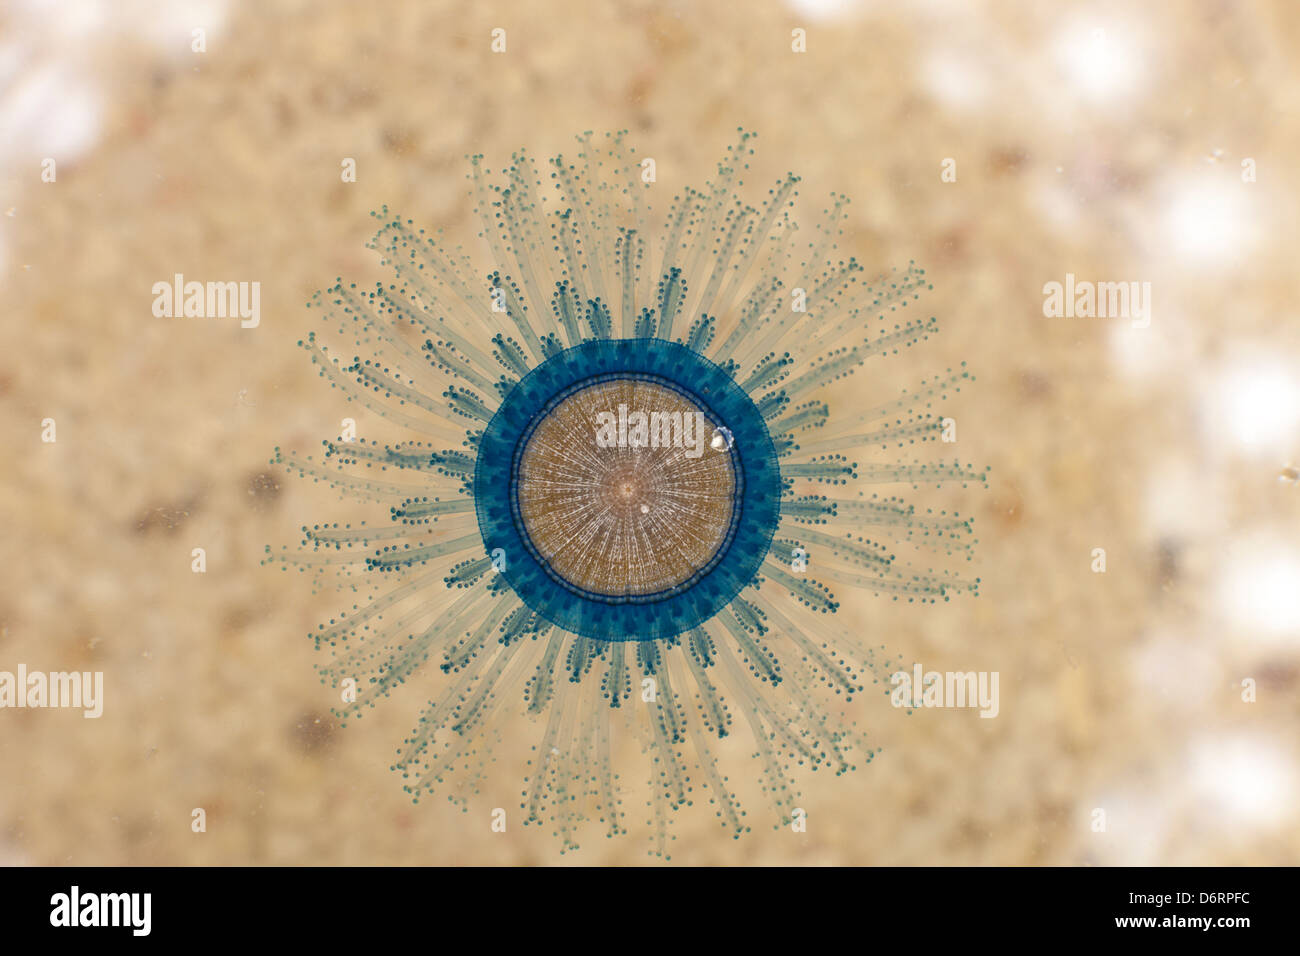 The Blue Button jellyfish - Cayman Islands Stock Photo